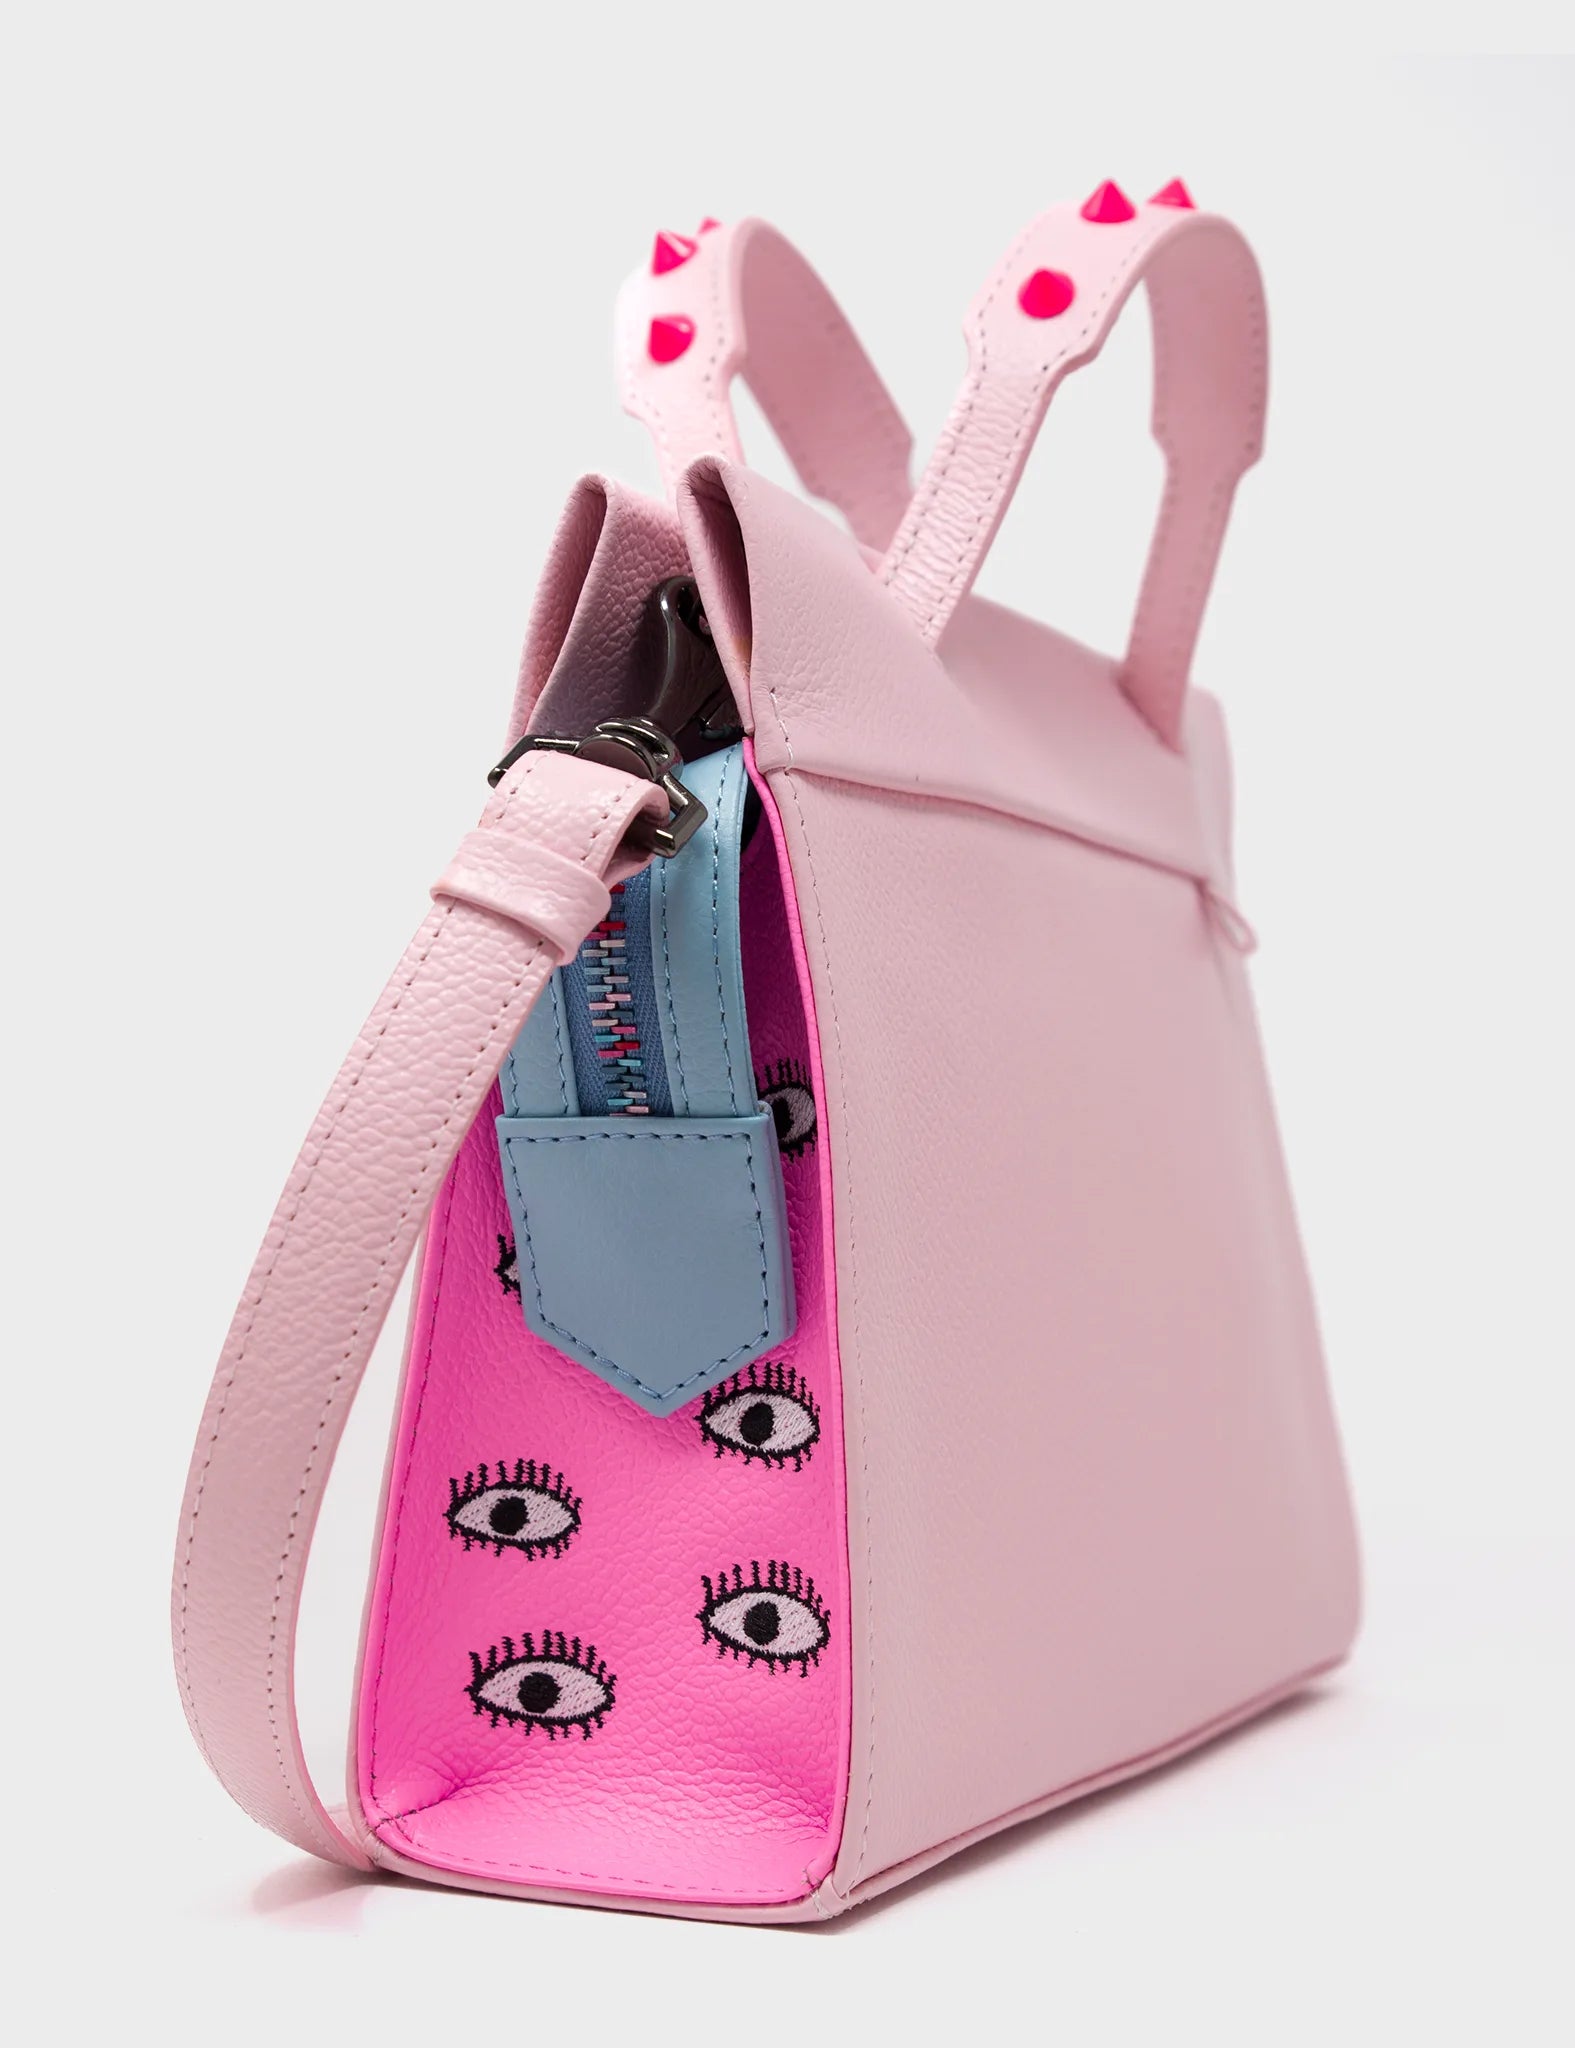 Crossbody Small Parfait Pink Leather Bag - Eyes Embroidery - Side